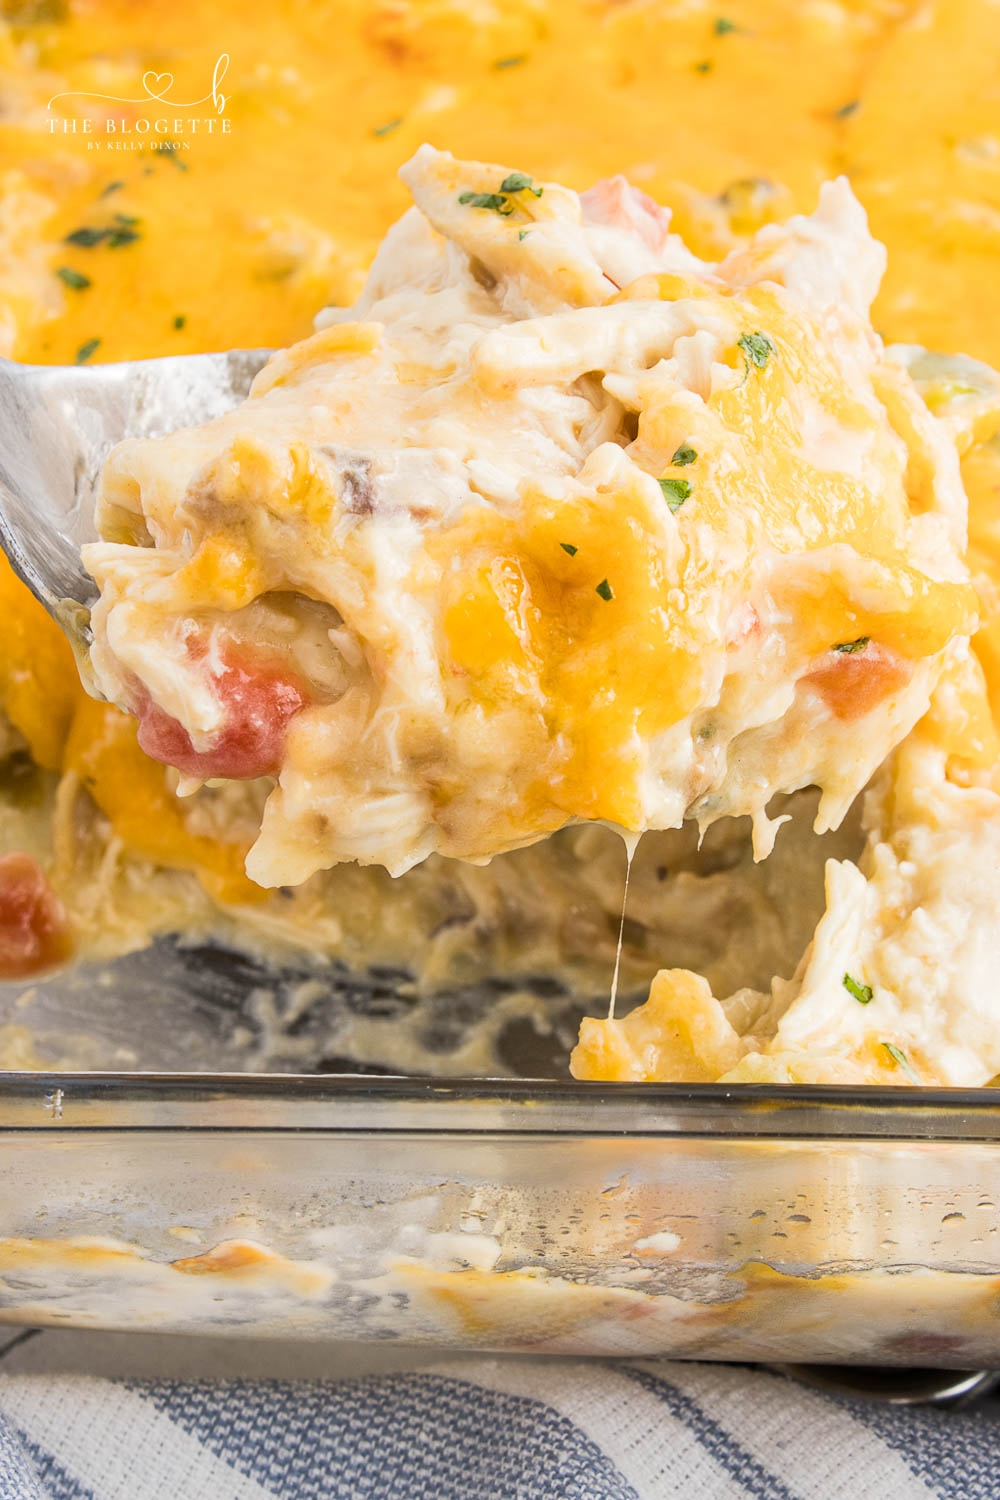 King Ranch Chicken Casserole is a combination of chicken, cheese, veggies, and corn tortillas in a rich and creamy sauce.